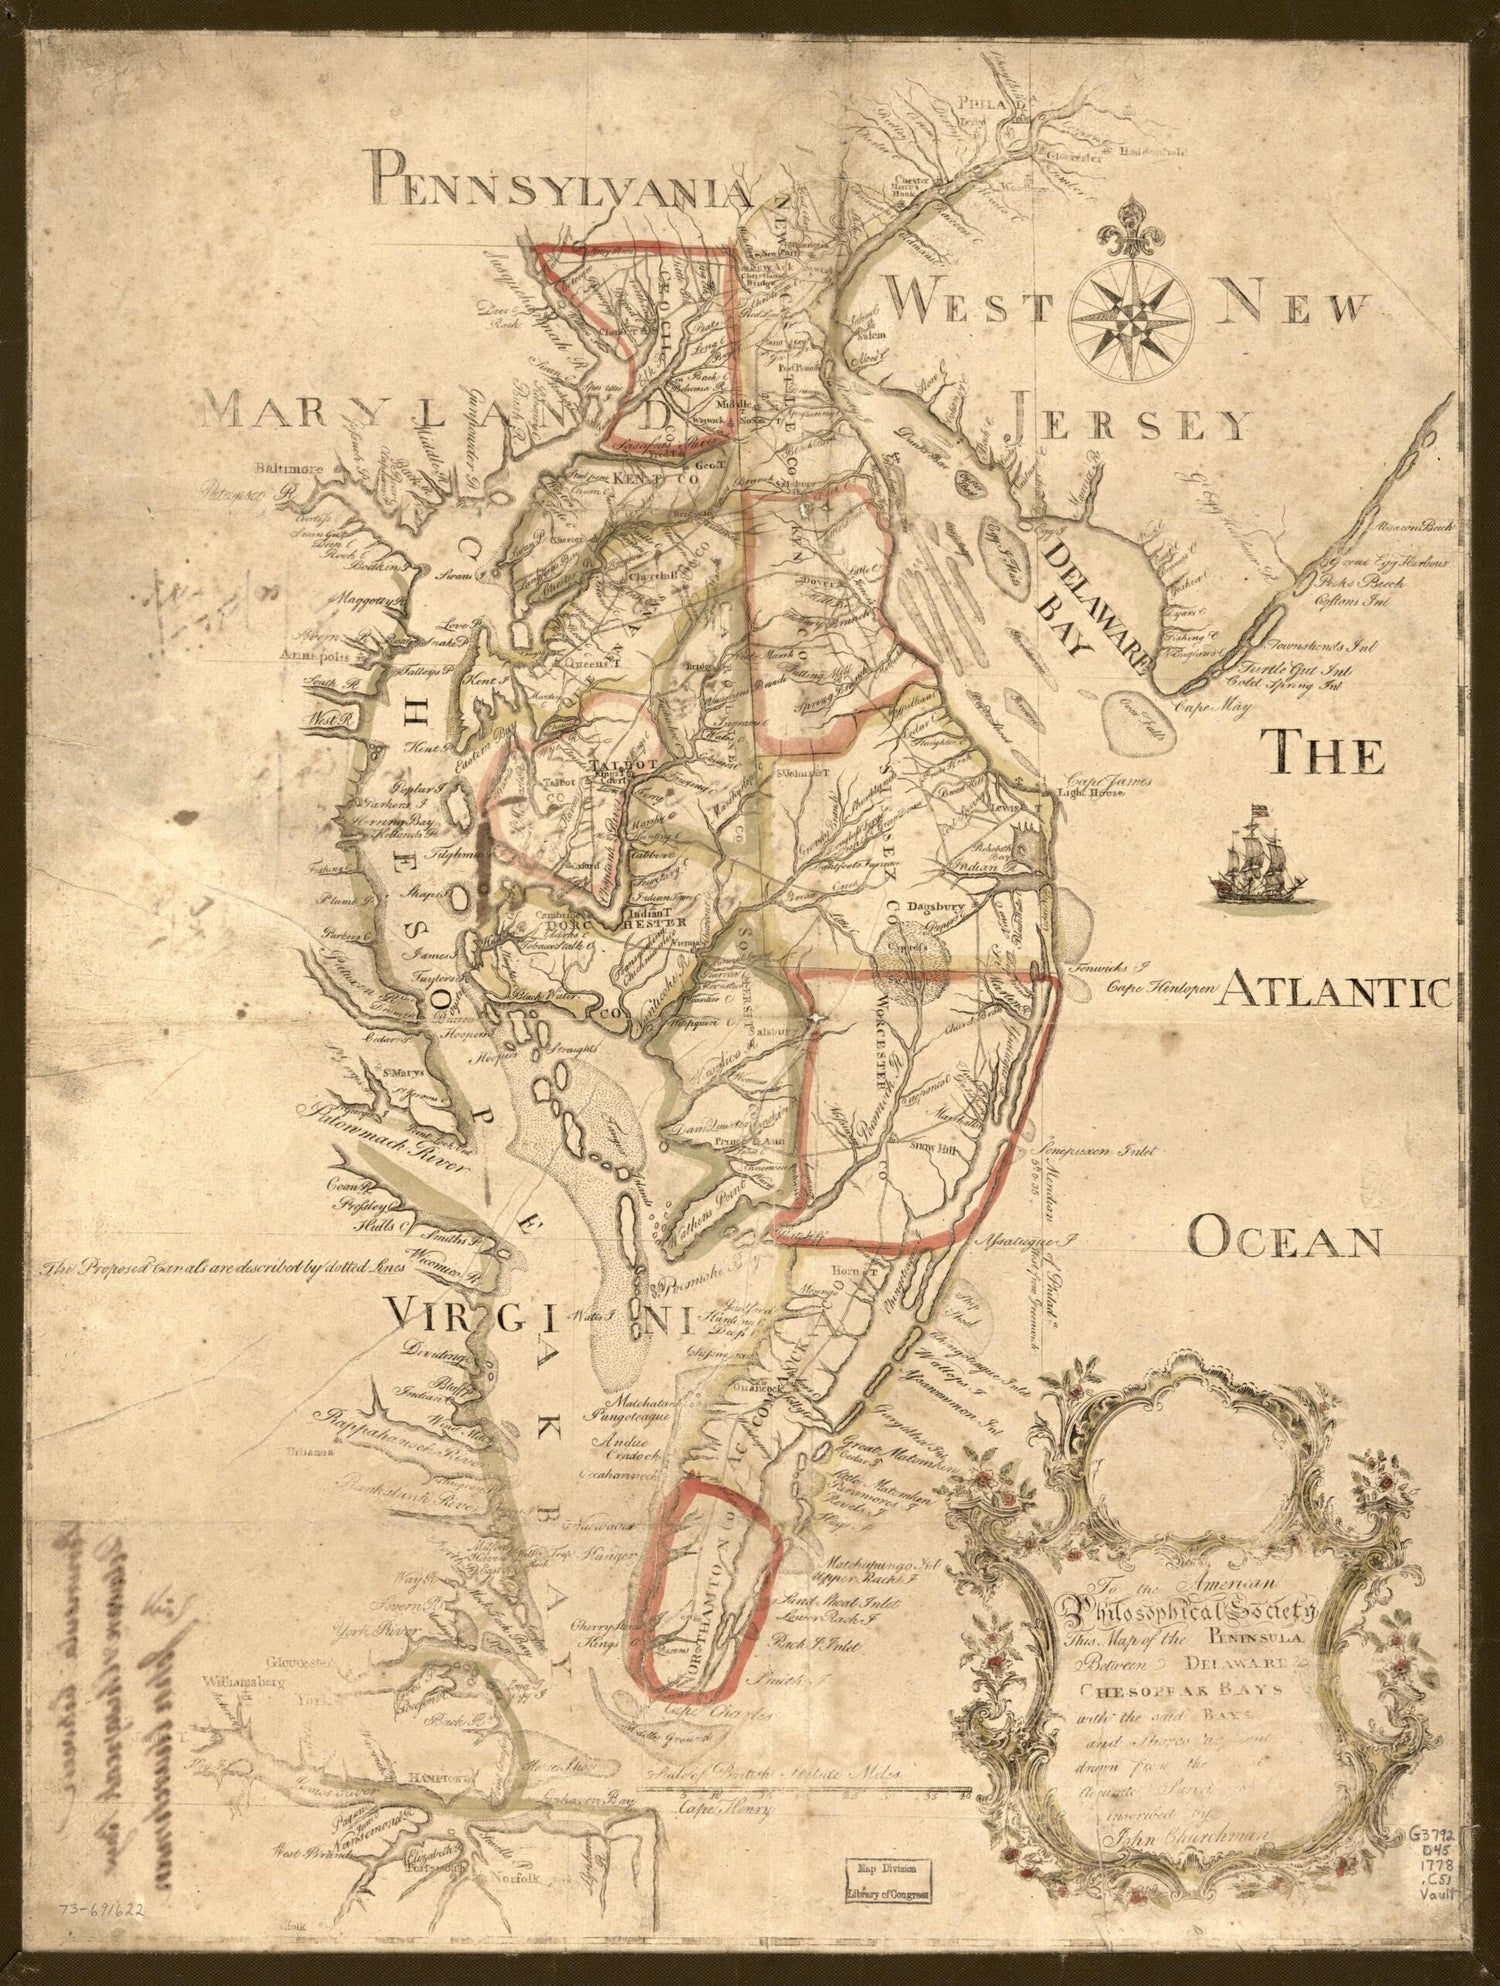 This old map of To the American Philosophical Society, This Map of the Peninsula Between Delaware &amp; Chesopeak Bays, With the Said Bays and Shores Adjacent Drawn from the Most Accurate Surveys Is humbly Inscribed by John Churchman from 1778 was created by